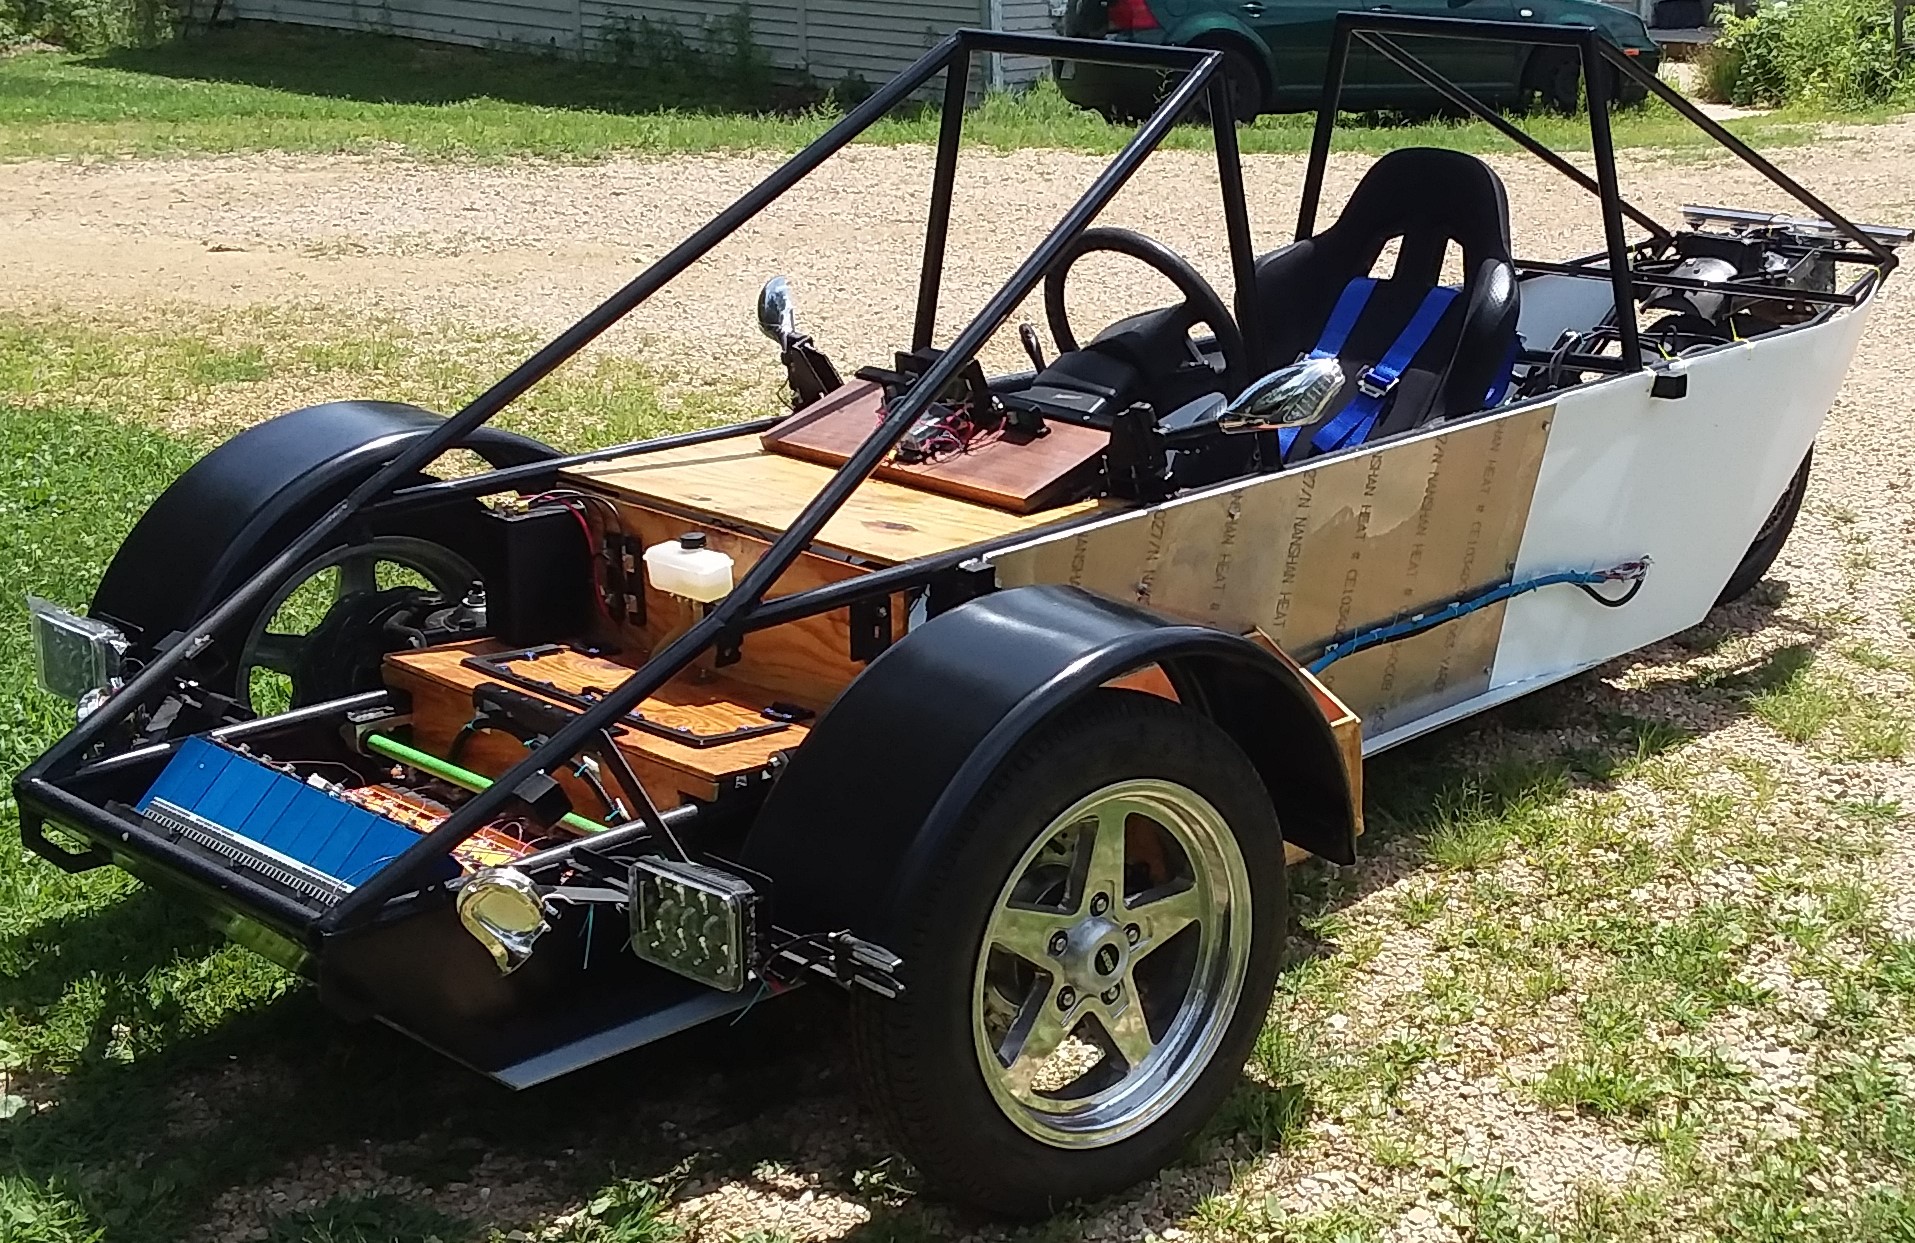 Twenty Years of Home Built Electric Car Adventures A Three Part